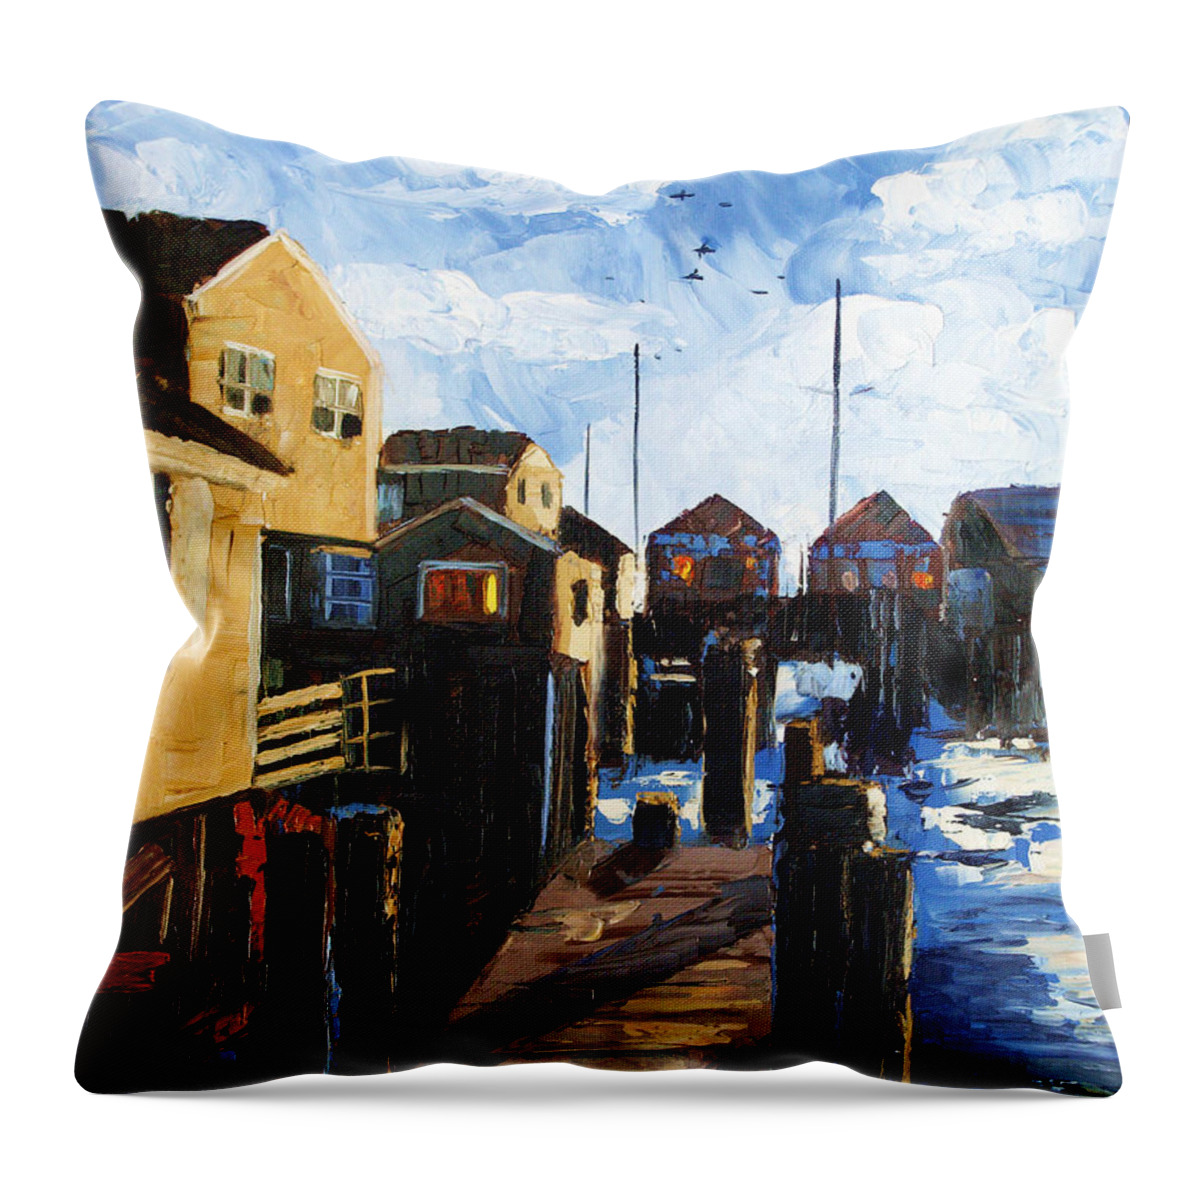 Nantucket Framed Prints Throw Pillow featuring the painting Nantucket by Anthony Falbo